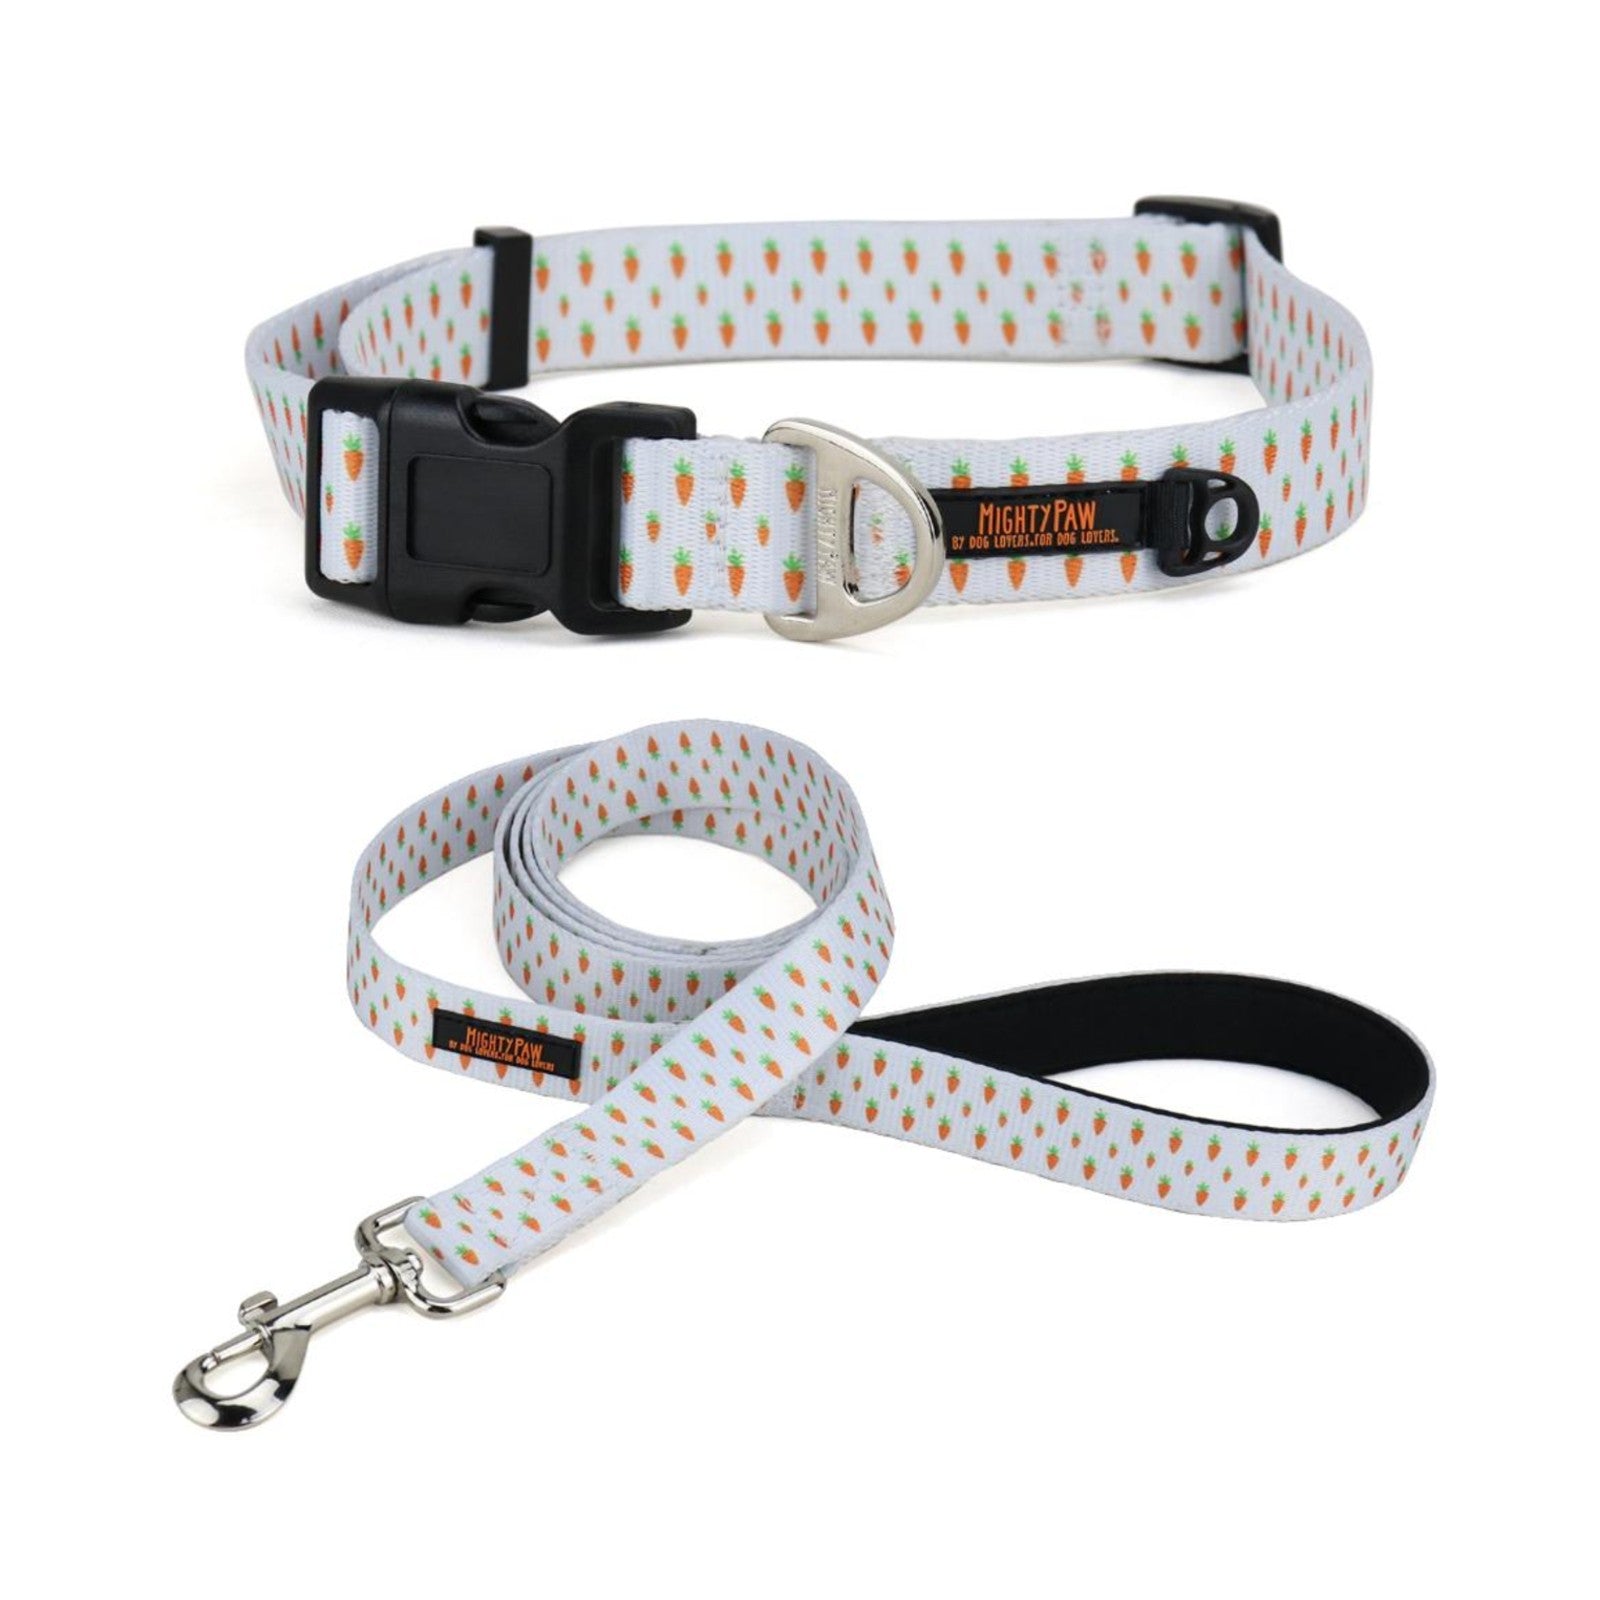 Festive Easter Dog Collar & Leash Set with Durable D-Ring